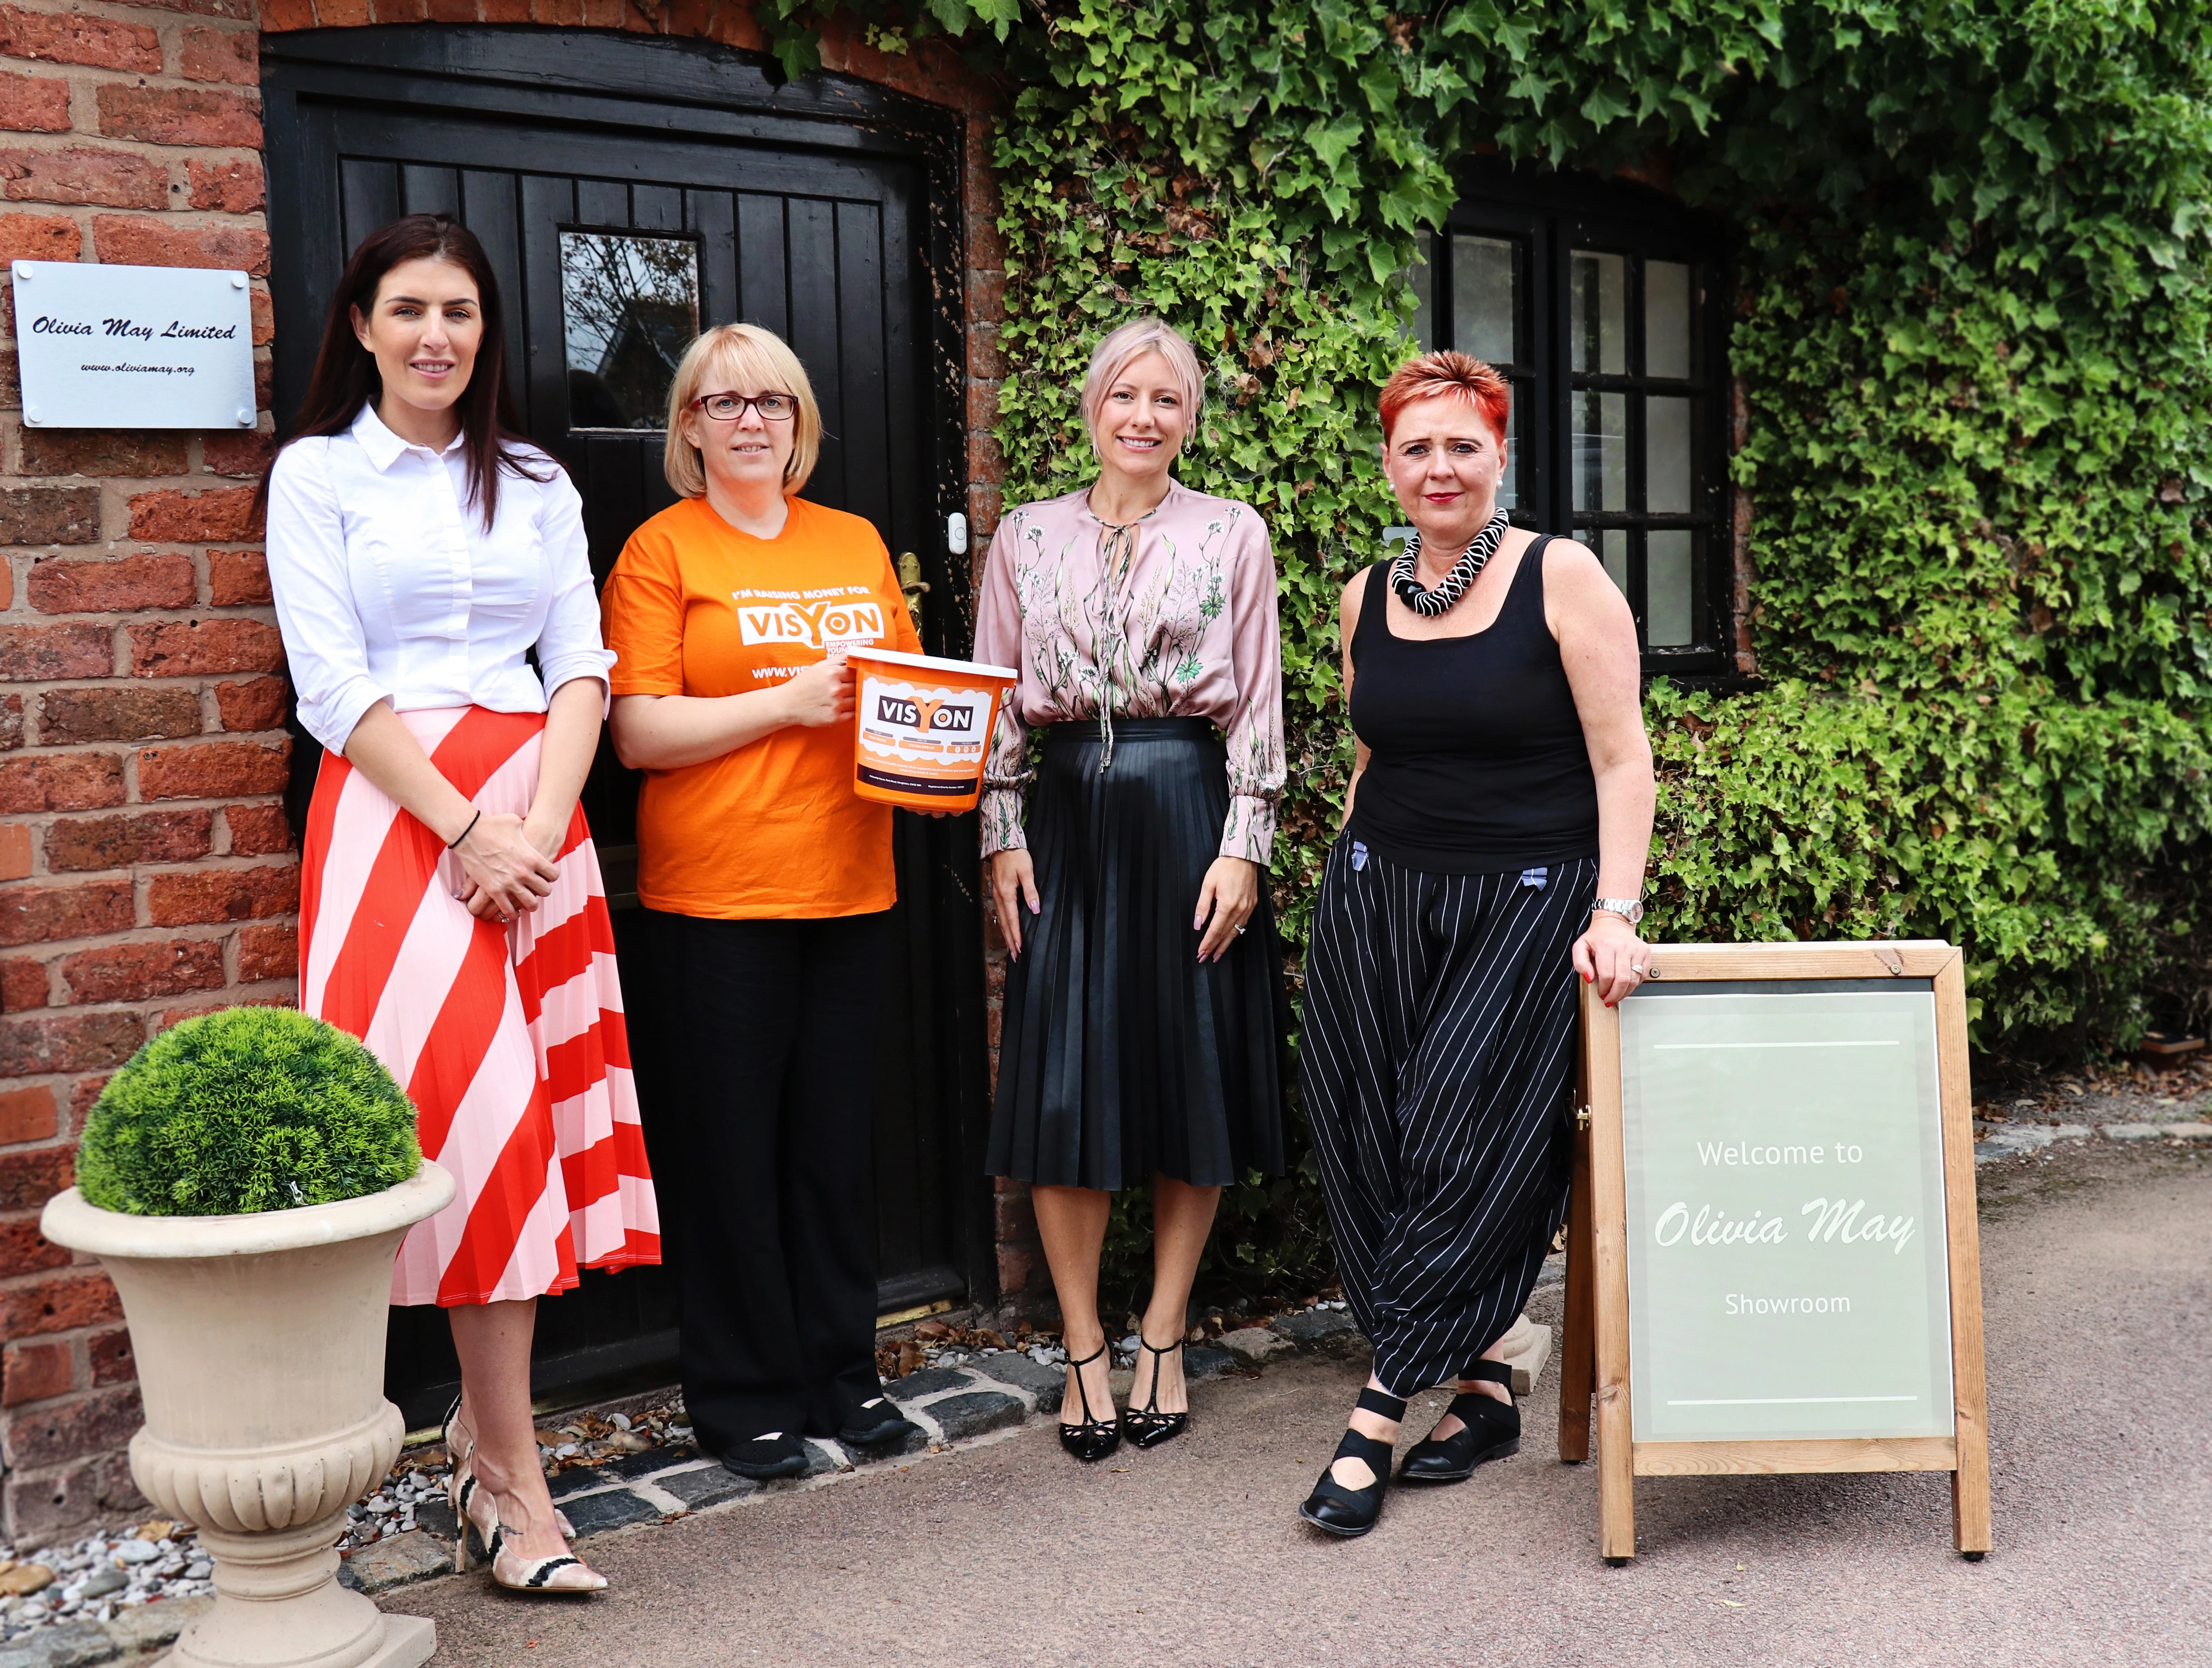 Jodie Evans, Sandi Marshall from Visyon, Emma Male and Ann Whorrall, owner Olivia May